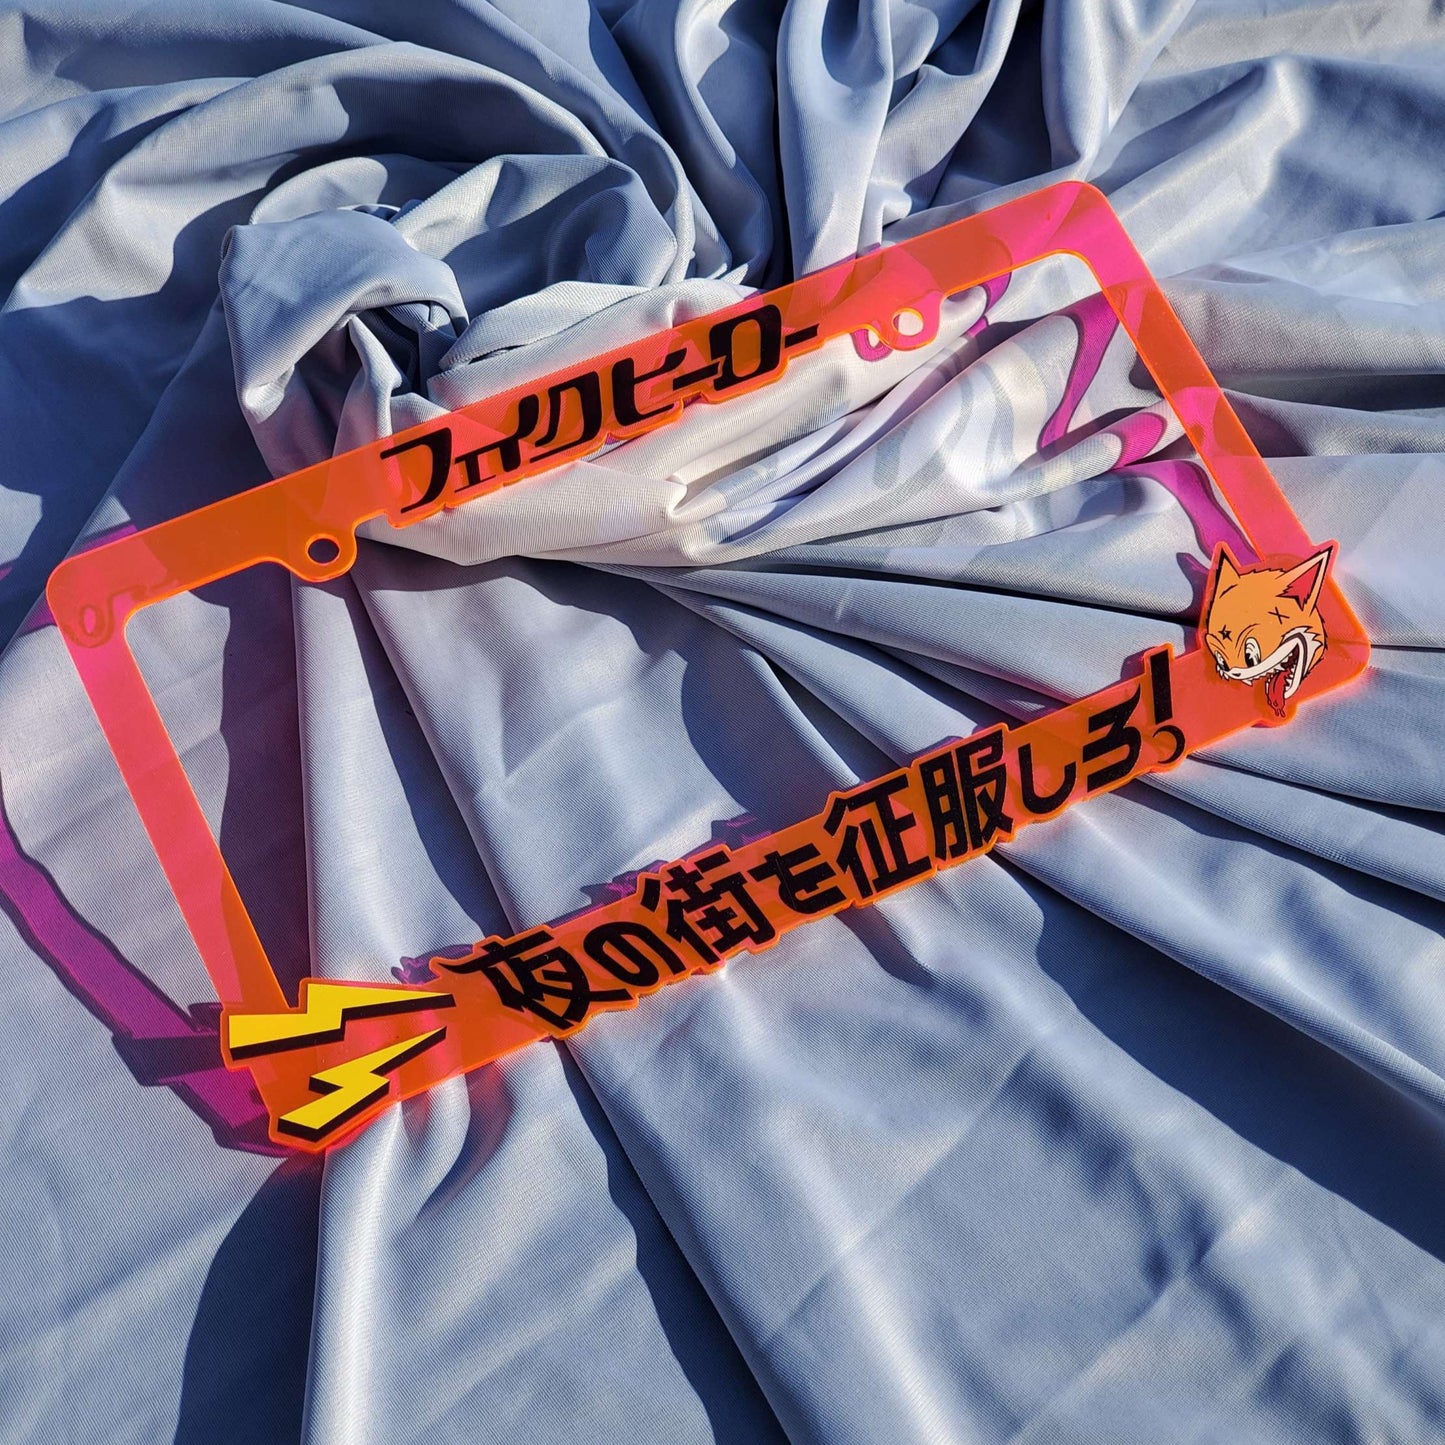 Conquer The Night Plate Frame (Neon Pink-Red)